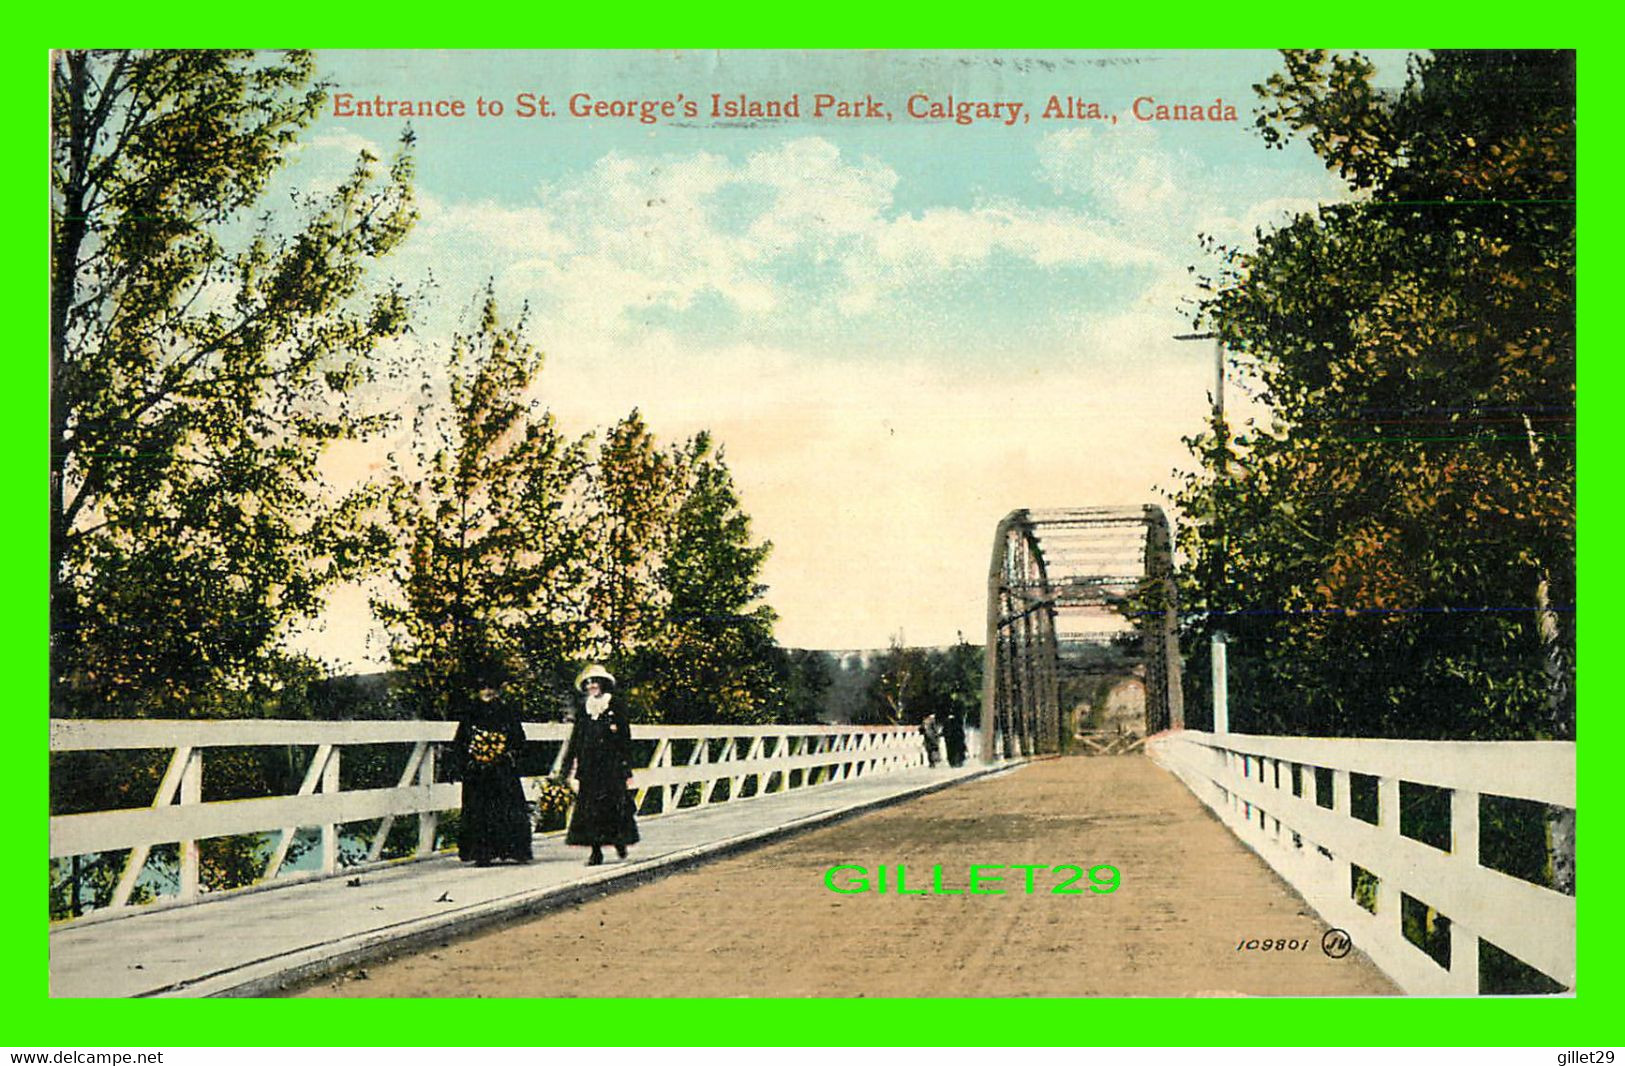 CALGARY, ALBERTA - ENTRANCE TO ST GEORGE'S ISLAND PARK - ANIMATED WITH PEOPLES -TRAVEL - THE VALENTINE & SONS PUB. - - Calgary